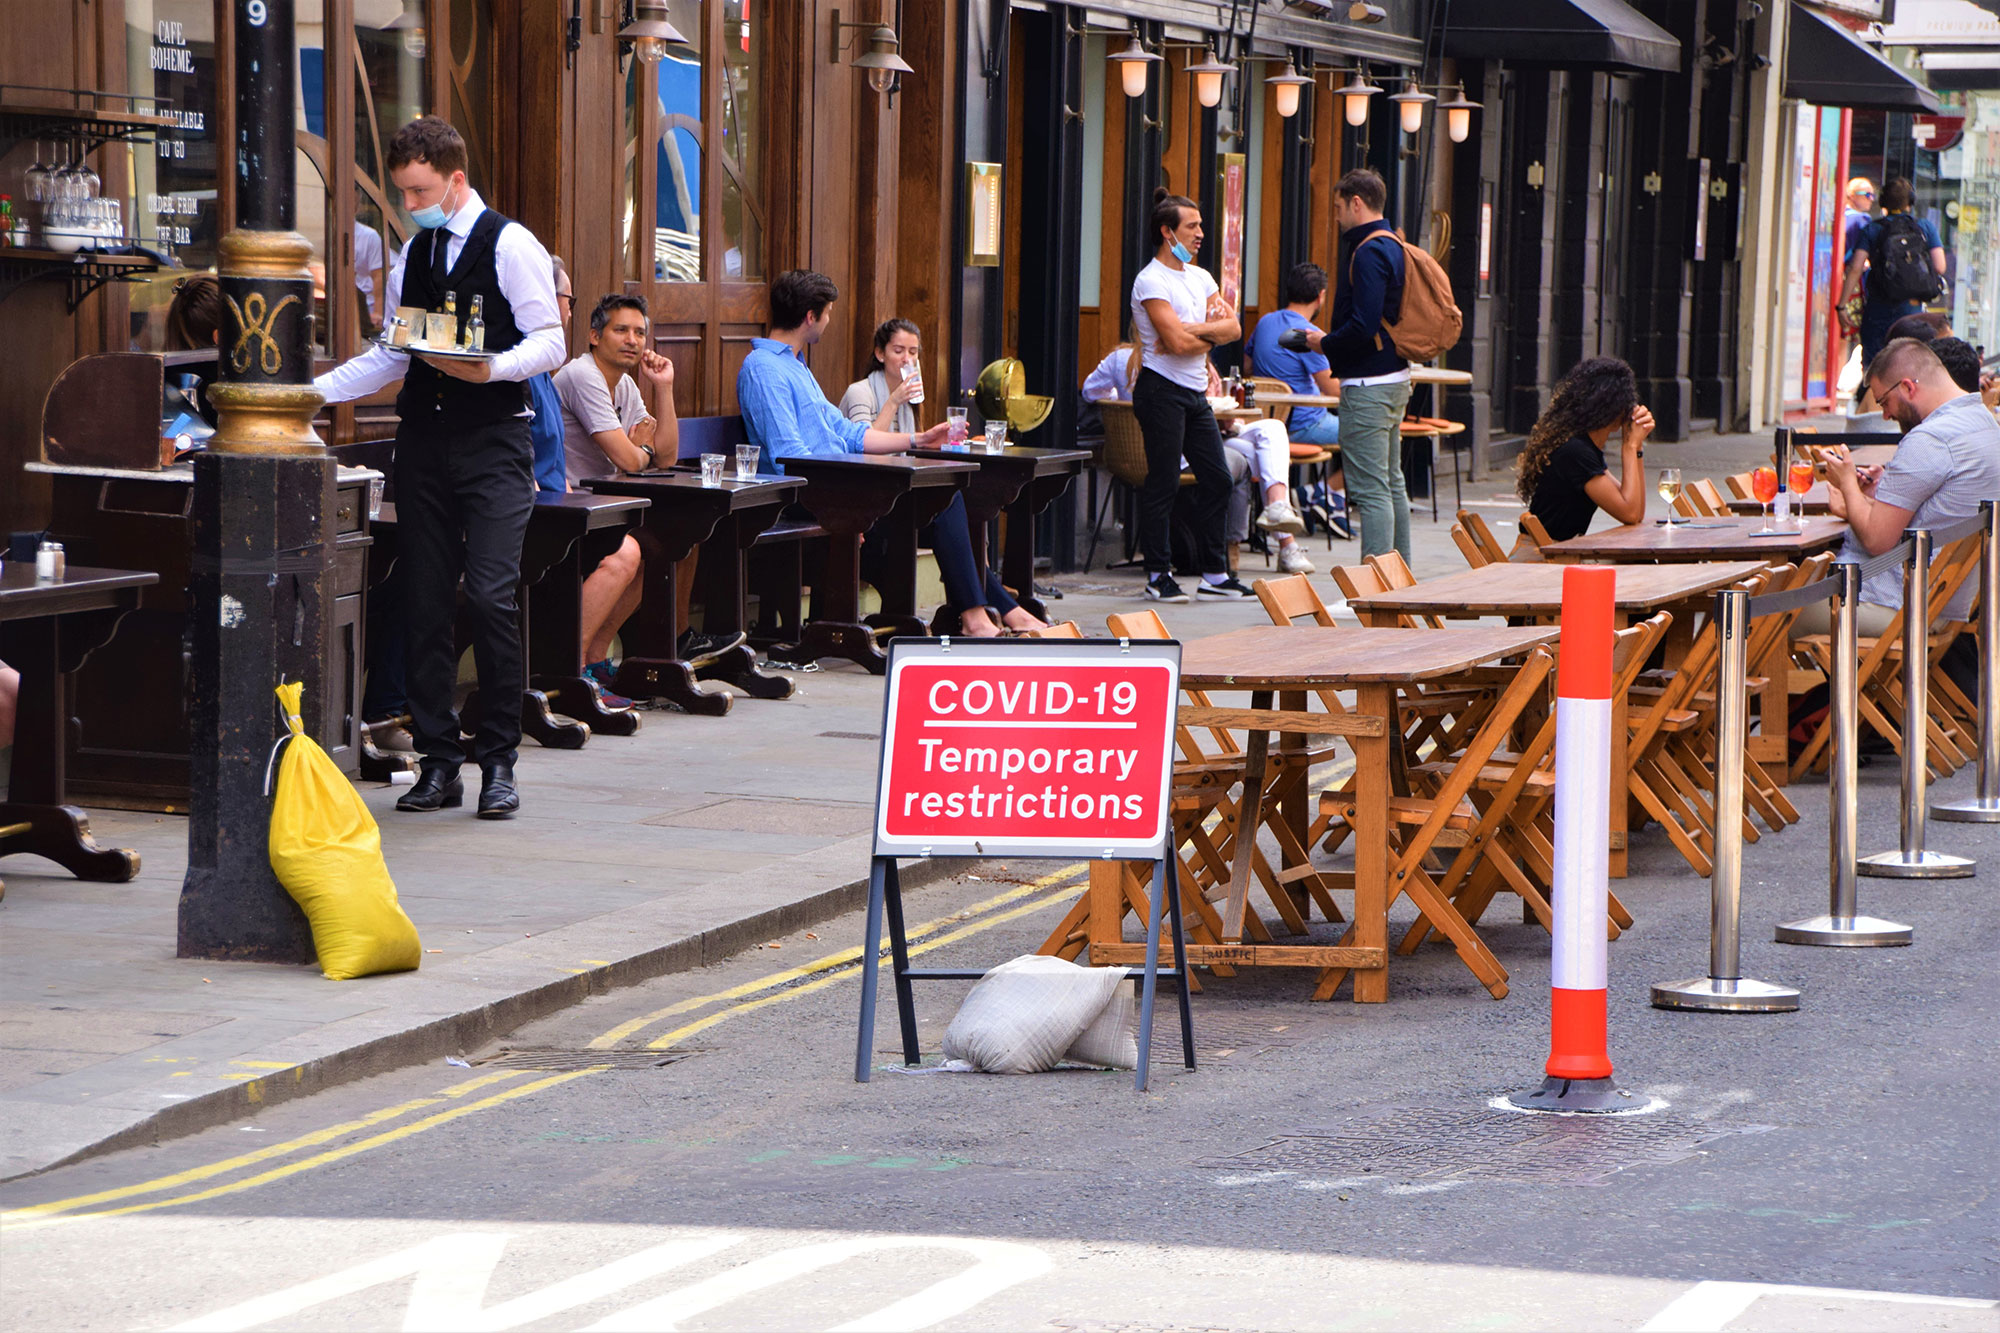 People dining outside by a sign which reads "COVID-19 temporary restrictions".